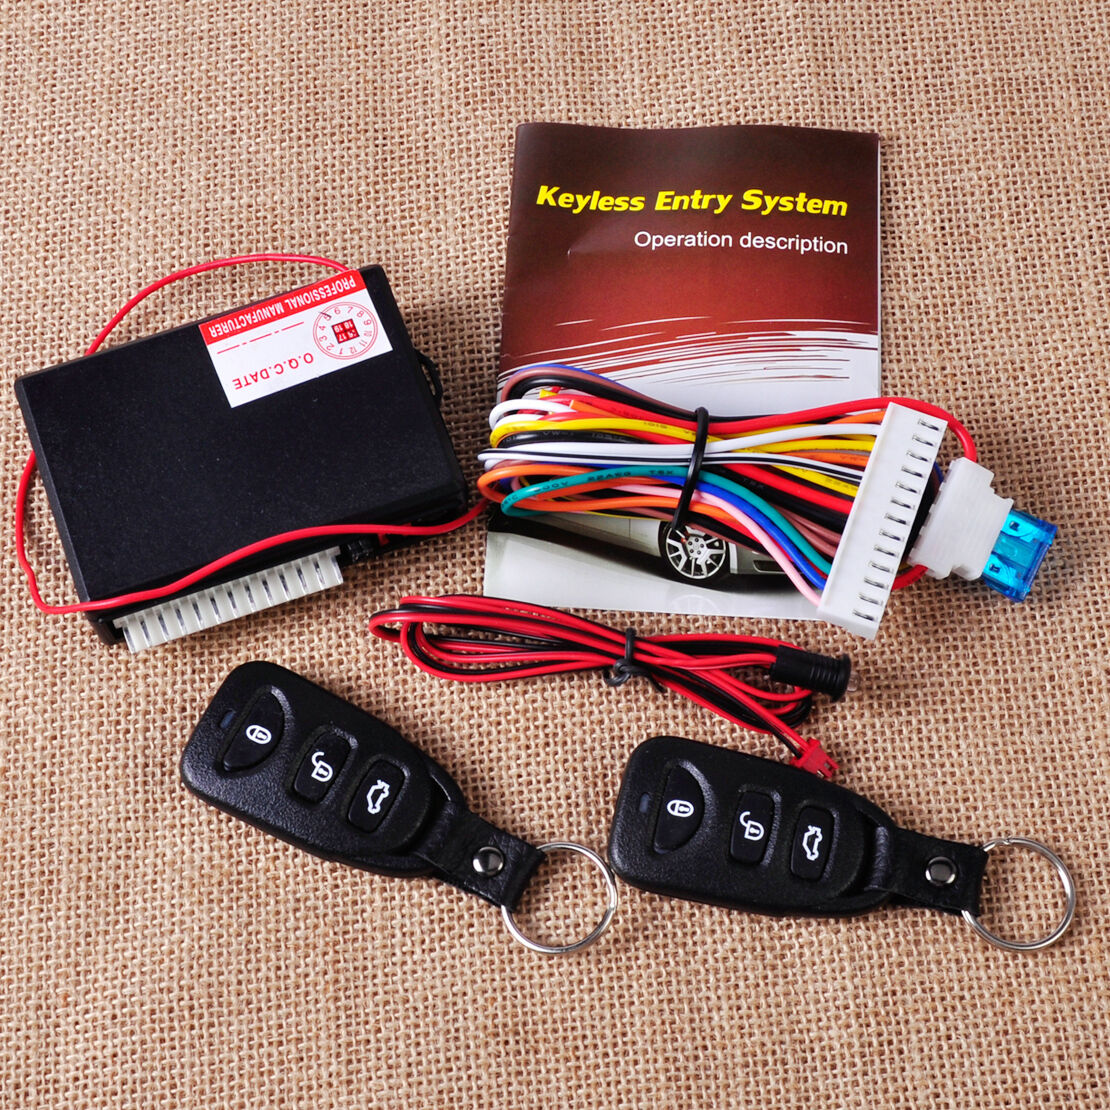 Universal Auto Car Keyless Entry & TWO 3-Button Remote Door Lock Controller Kit